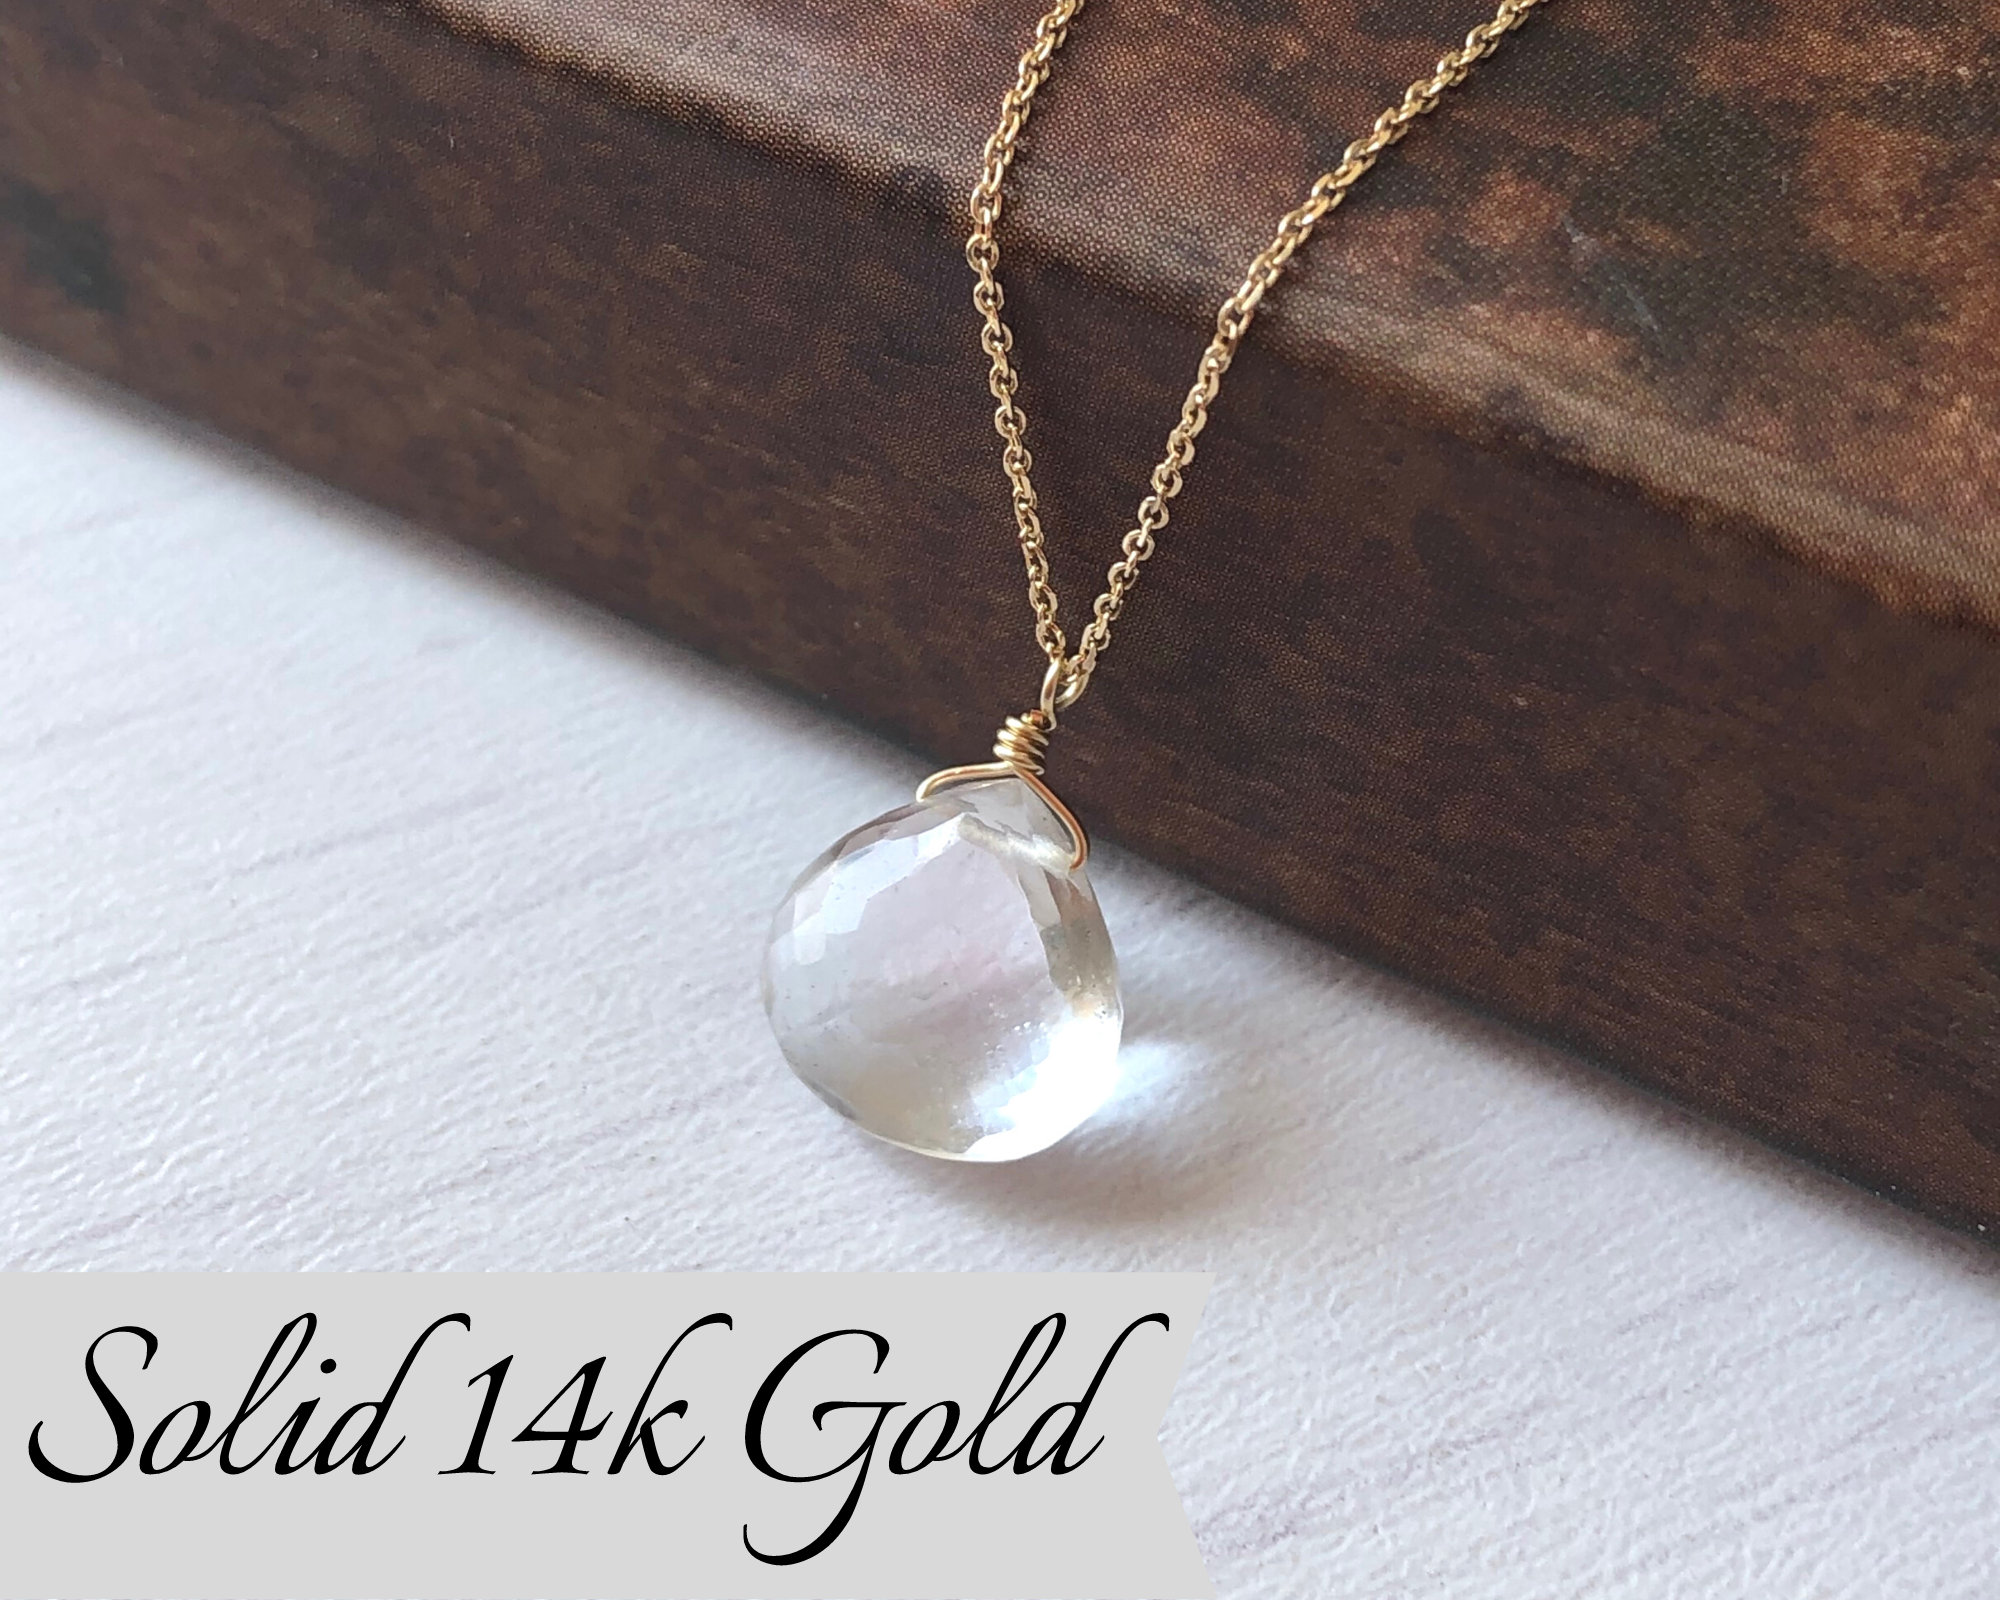 White Topaz Necklace, Clear Teardrop Pendant, Solid 14k Gold Necklace, April Birthstone, Dainty Gemstone Jewelry, Minimalist Layering Gift